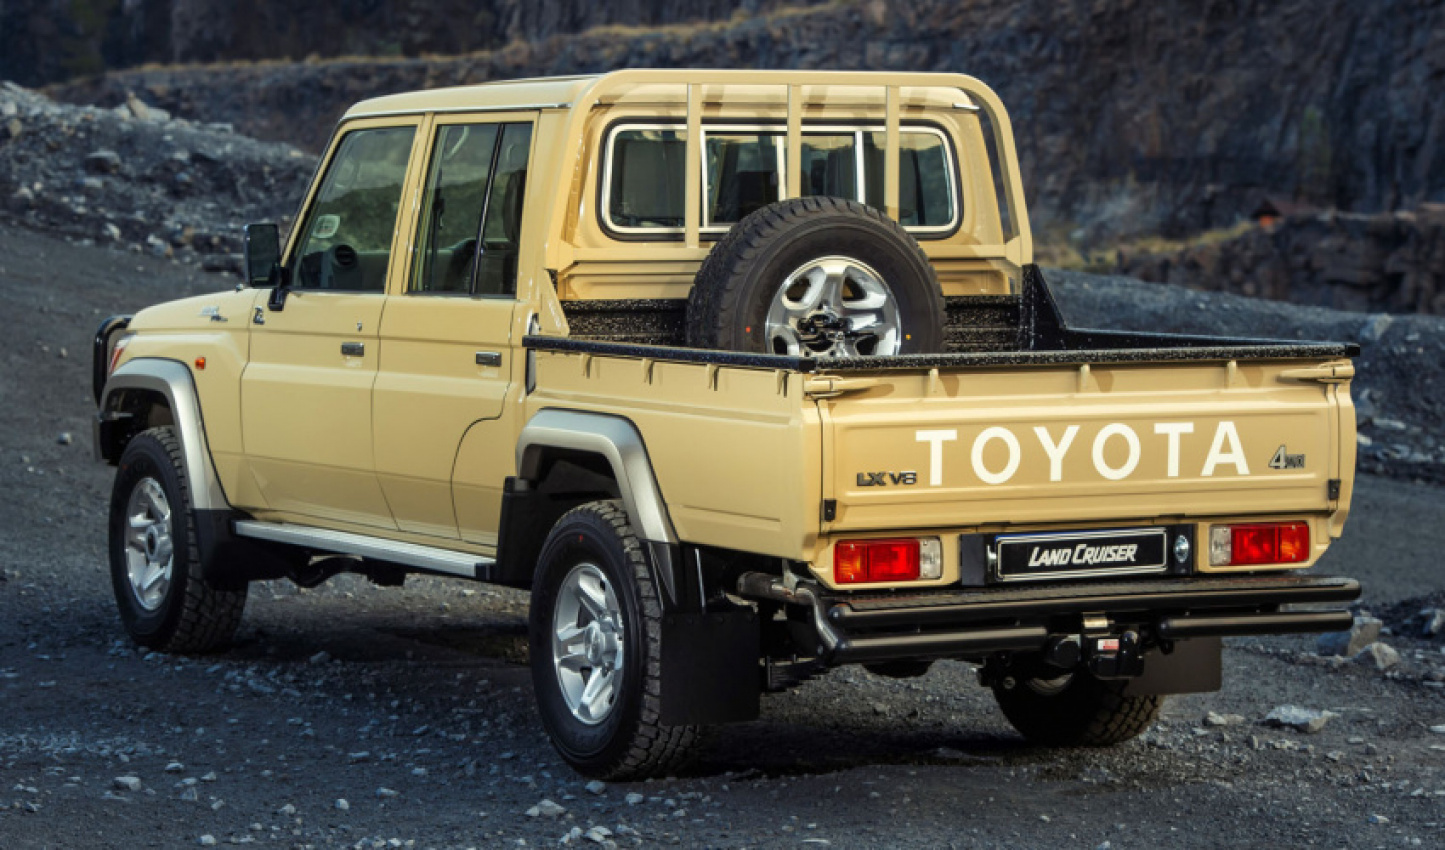 autos, cars, news, toyota, land cruiser, toyota land cruiser, toyota land cruiser 70th anniversary model, toyota land cruiser 70th anniversary edition bakkies launched